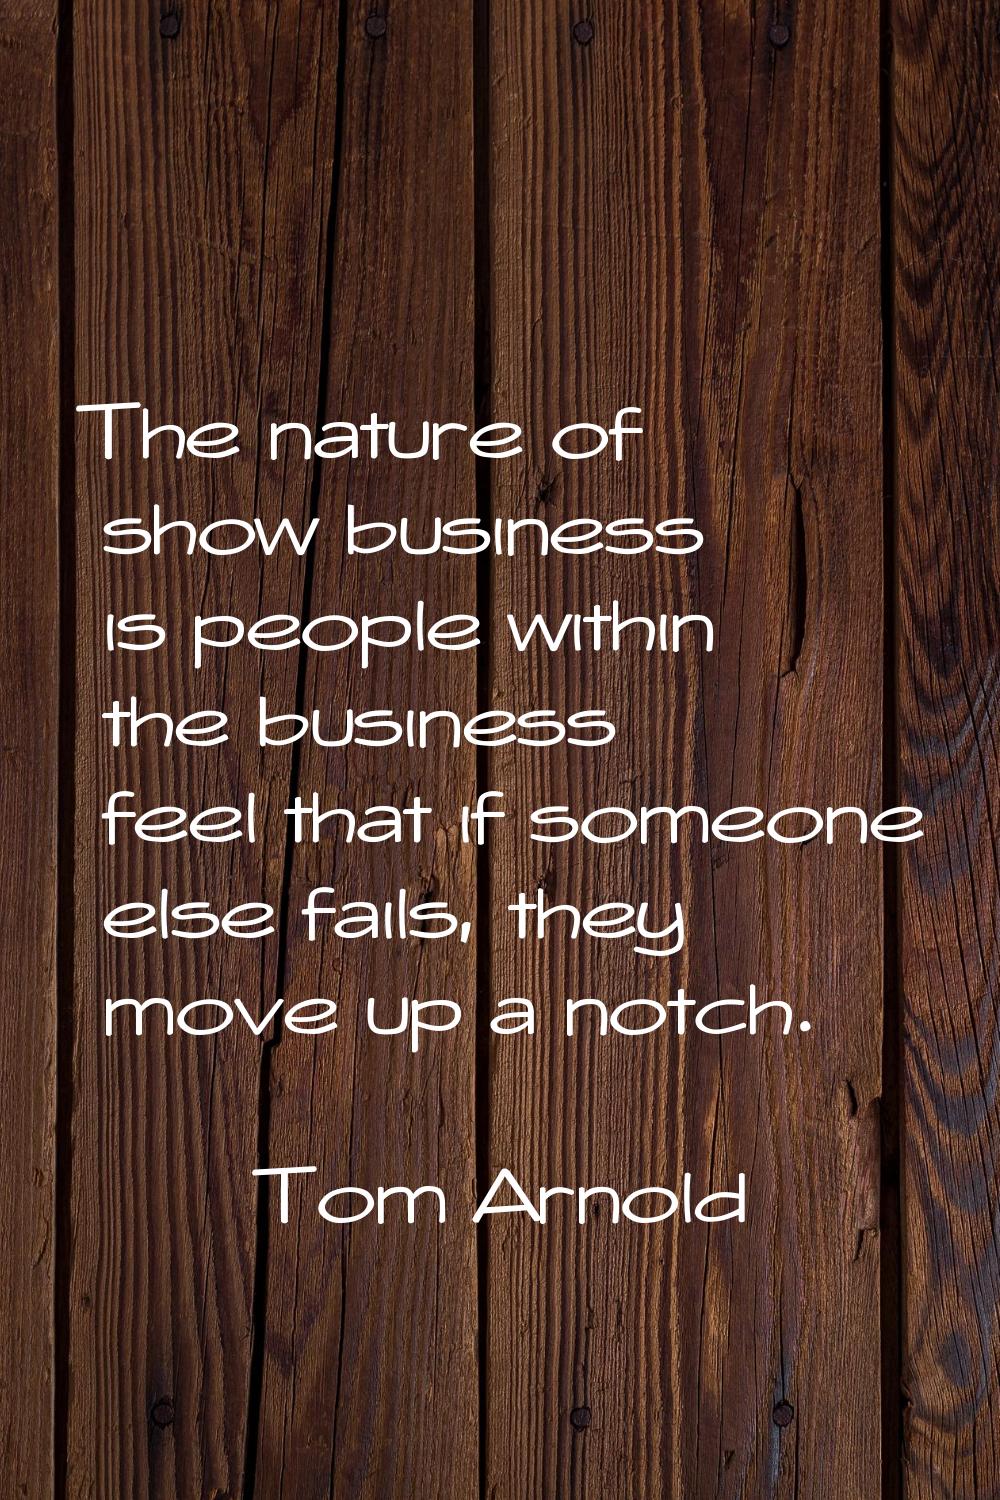 The nature of show business is people within the business feel that if someone else fails, they mov